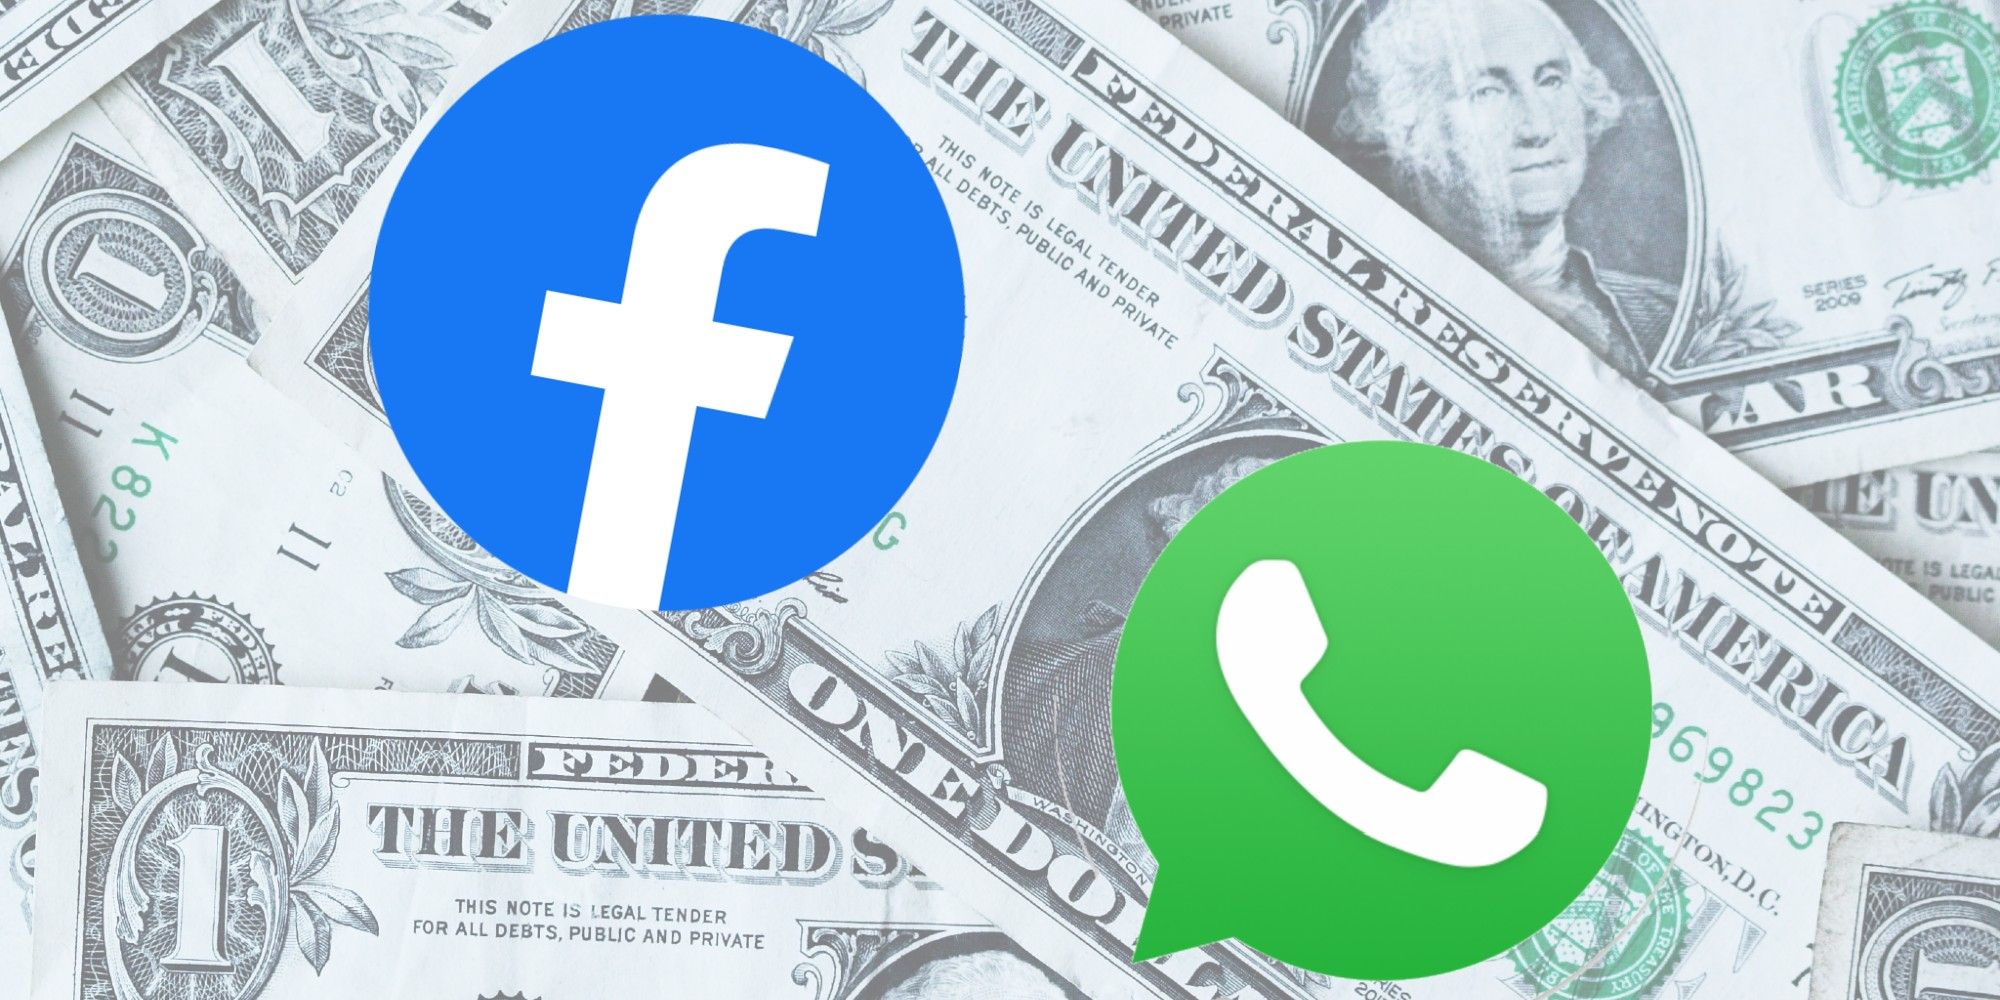 WhatsApp purchase info by Facebook